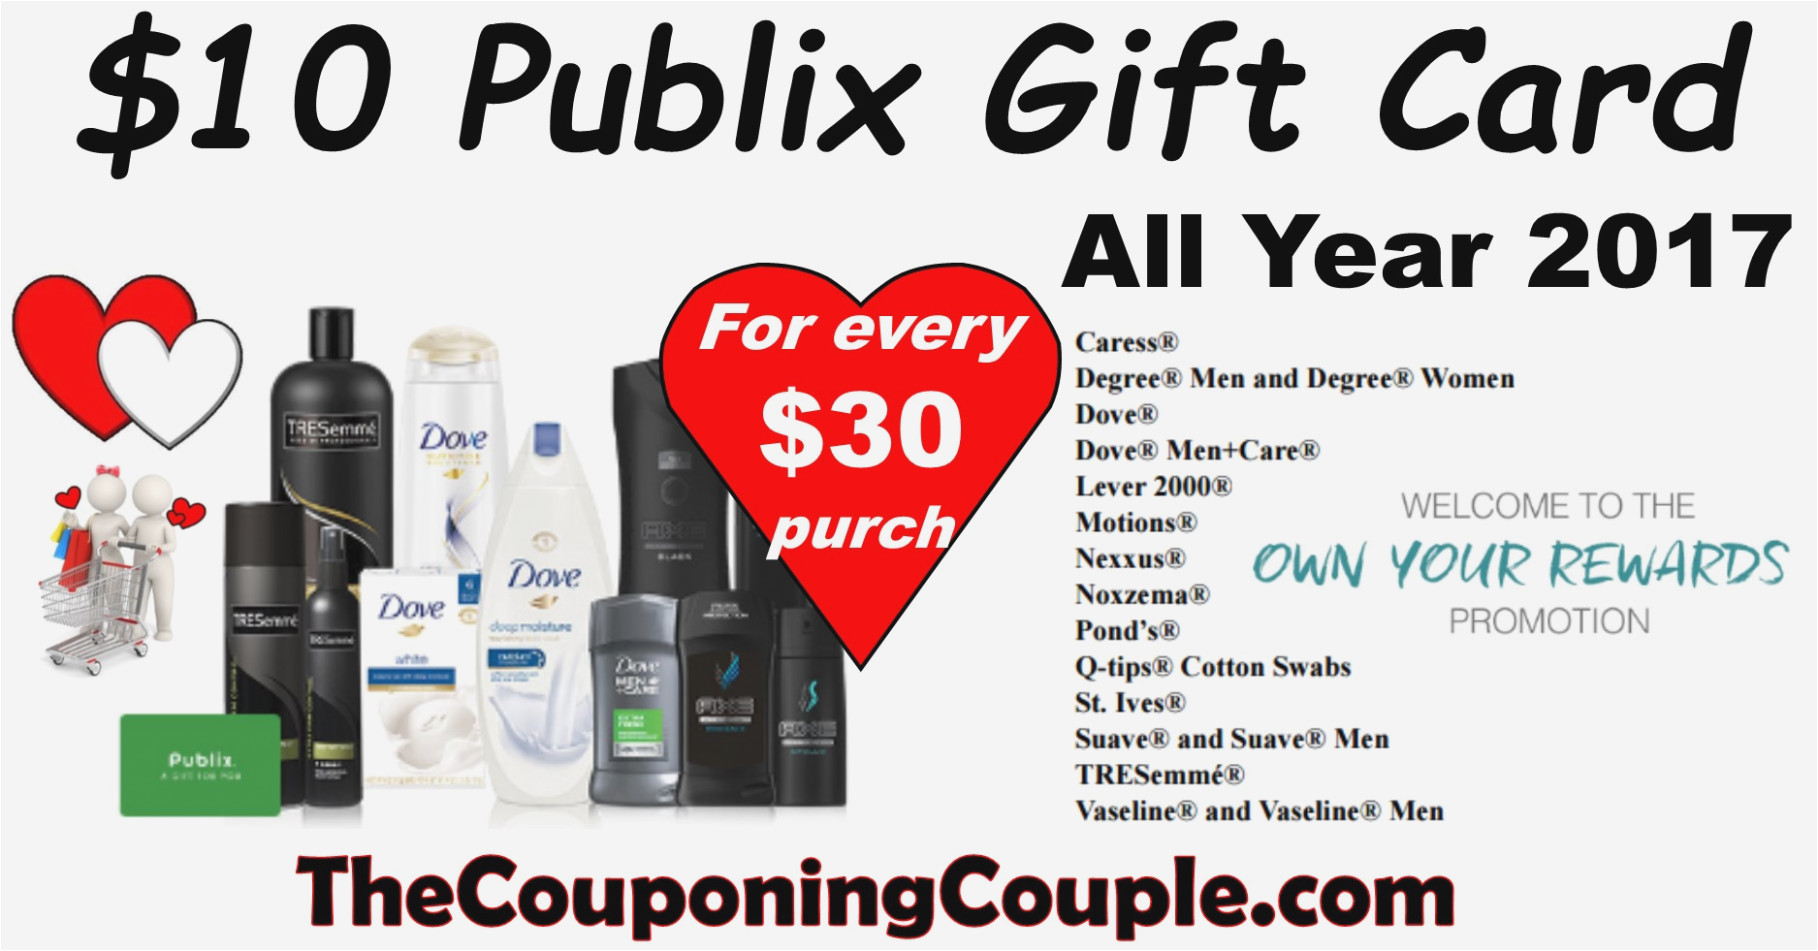 earn gift cards with publix own your rewards all year